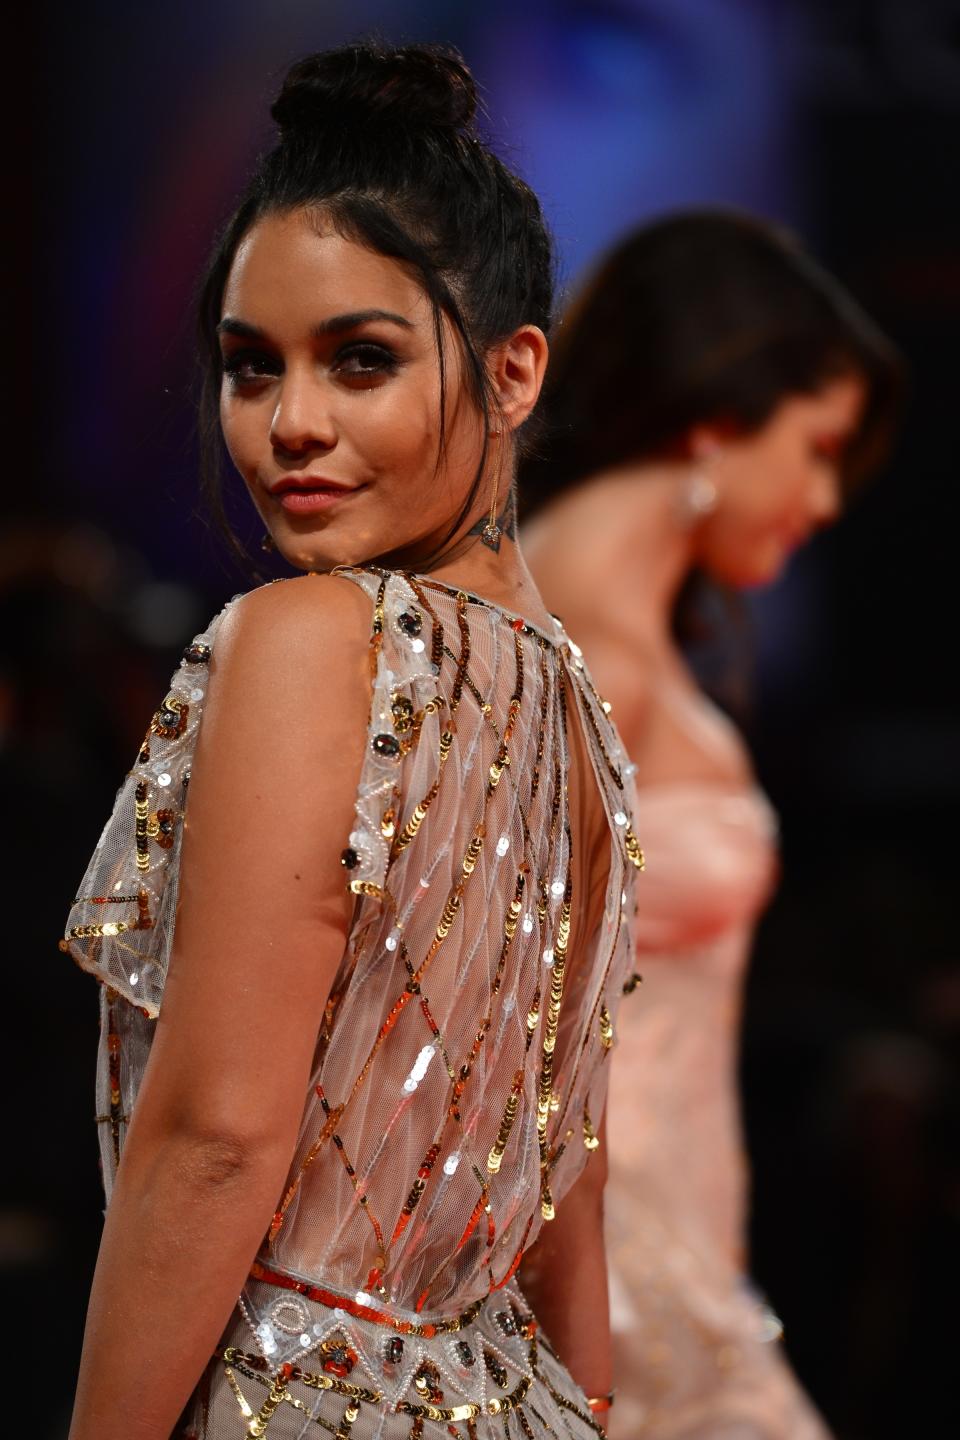 Vanessa Hudgens in a sequined, sheer dress on the red carpet, with another person slightly out of focus in the background